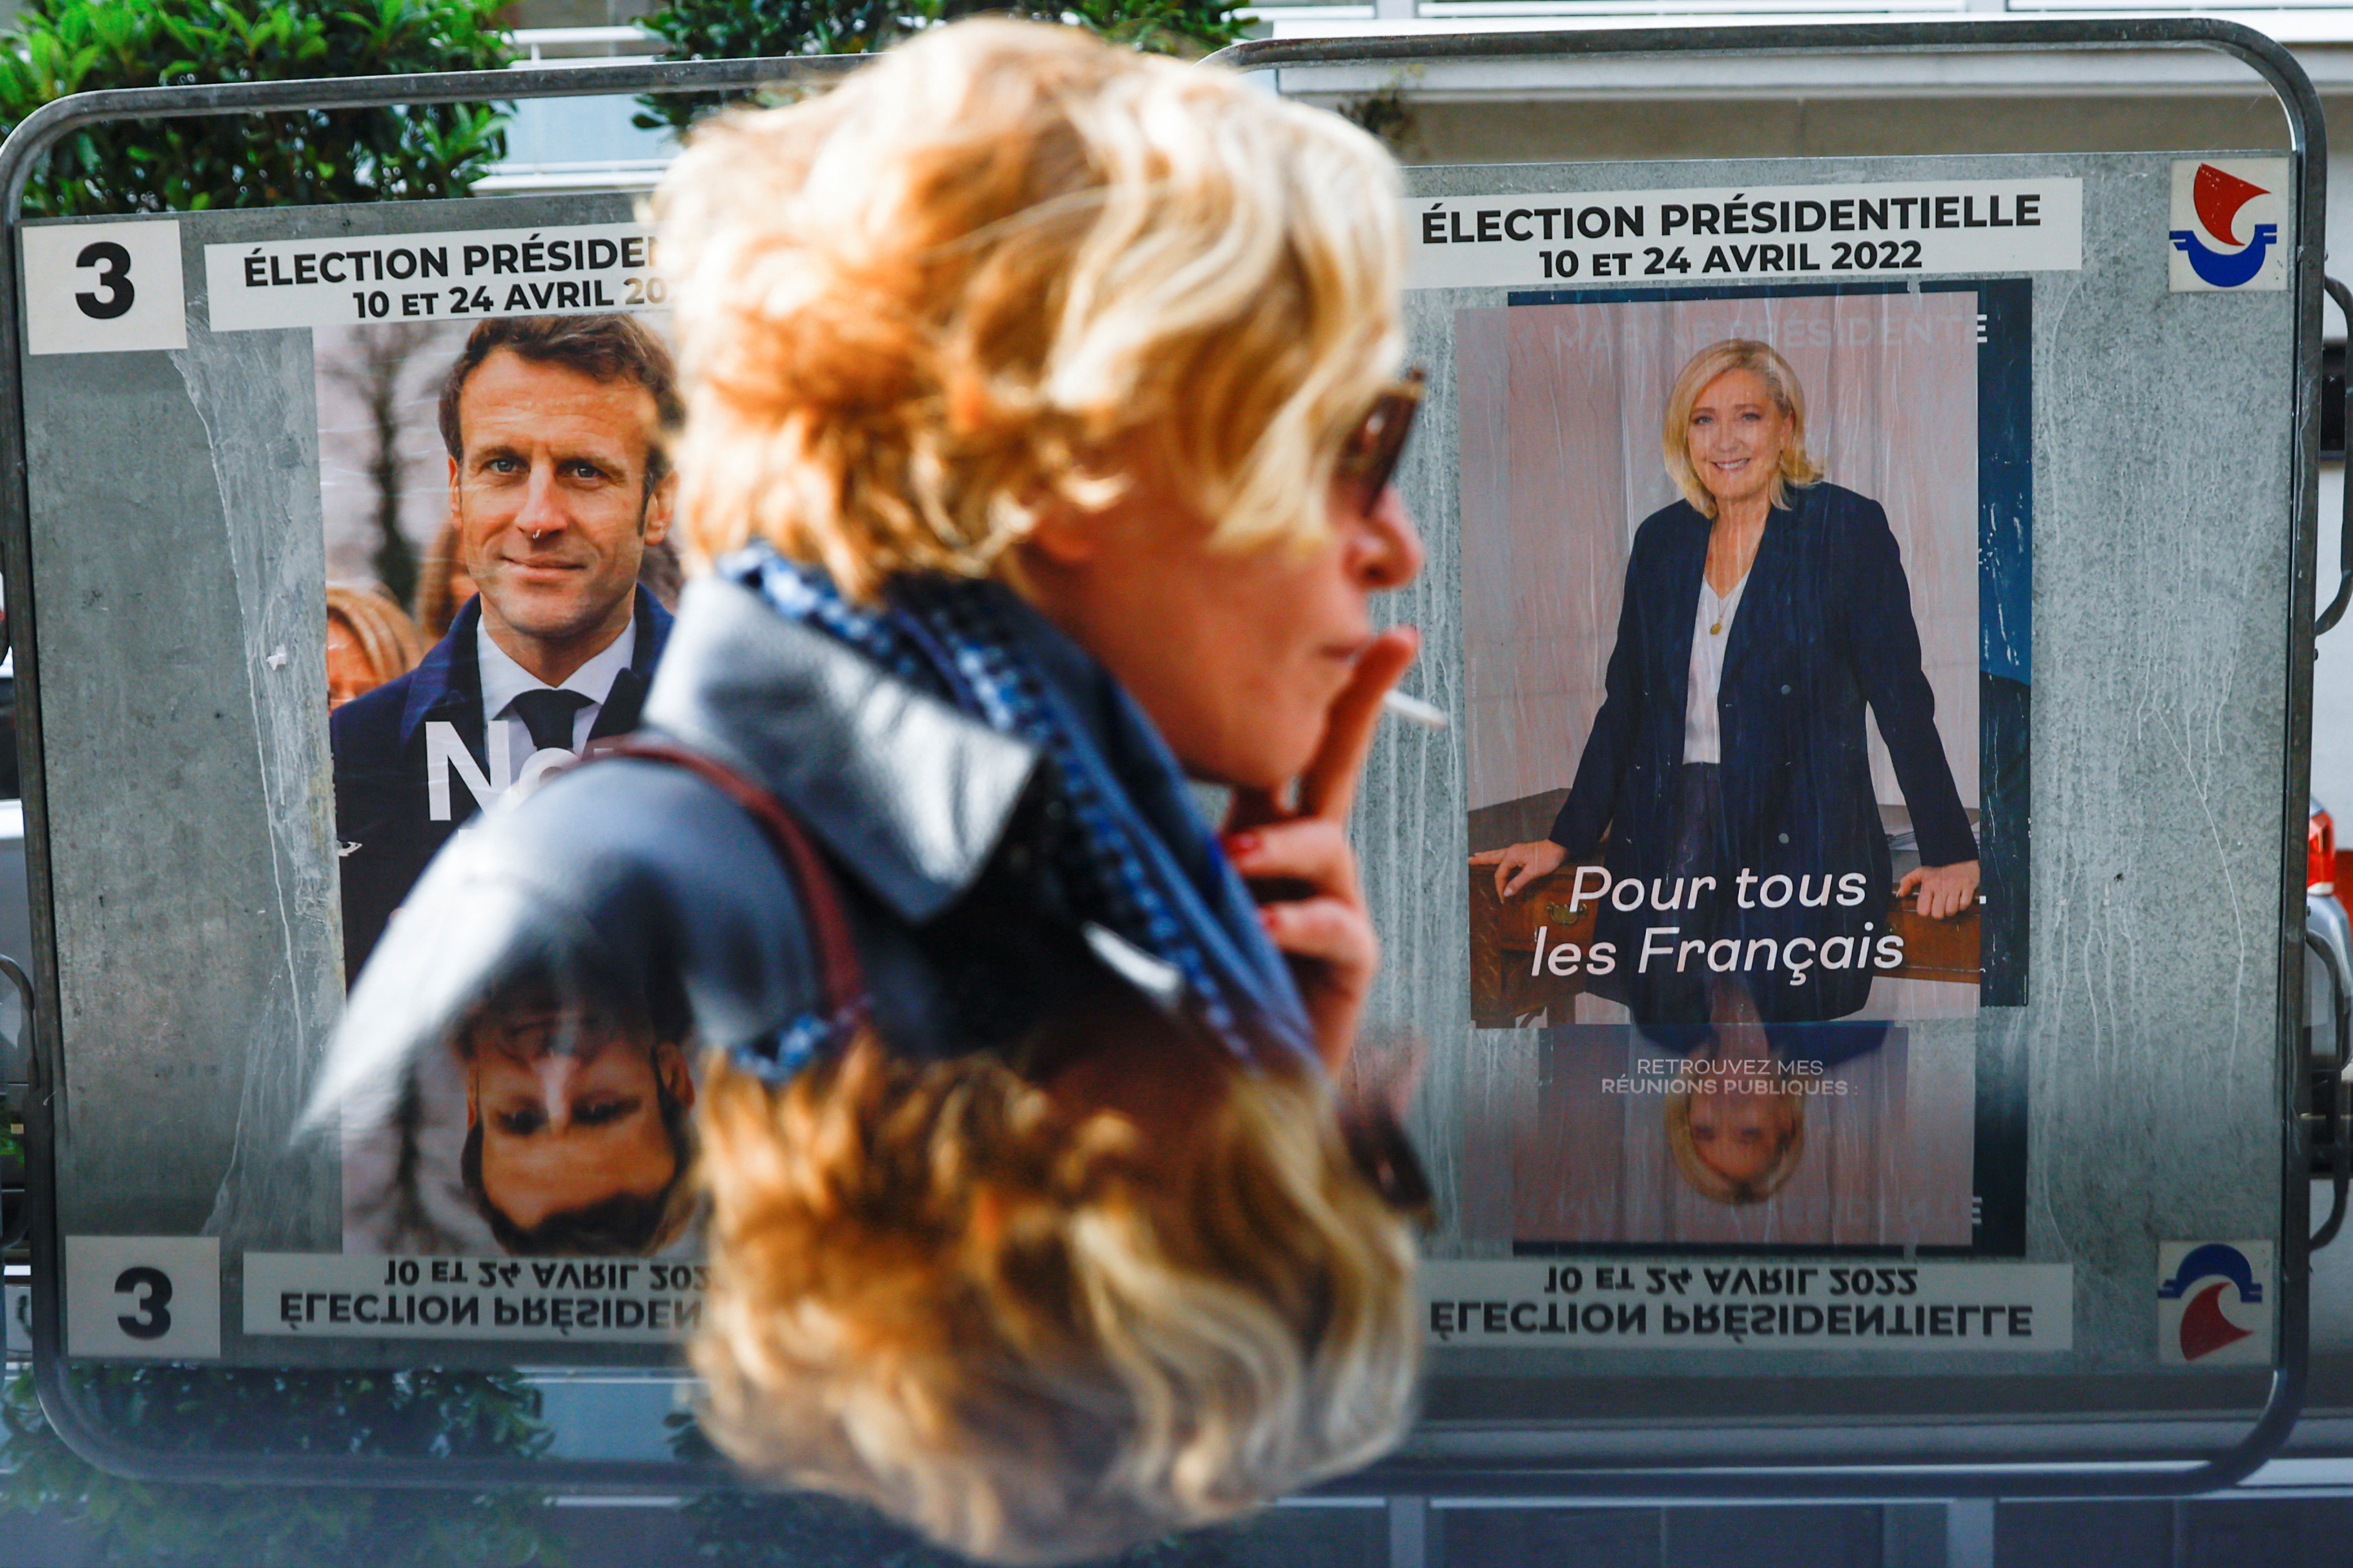 Official campaign posters of French presidential election candidates Marine le Pen and Emmanuel Macron, in Paris